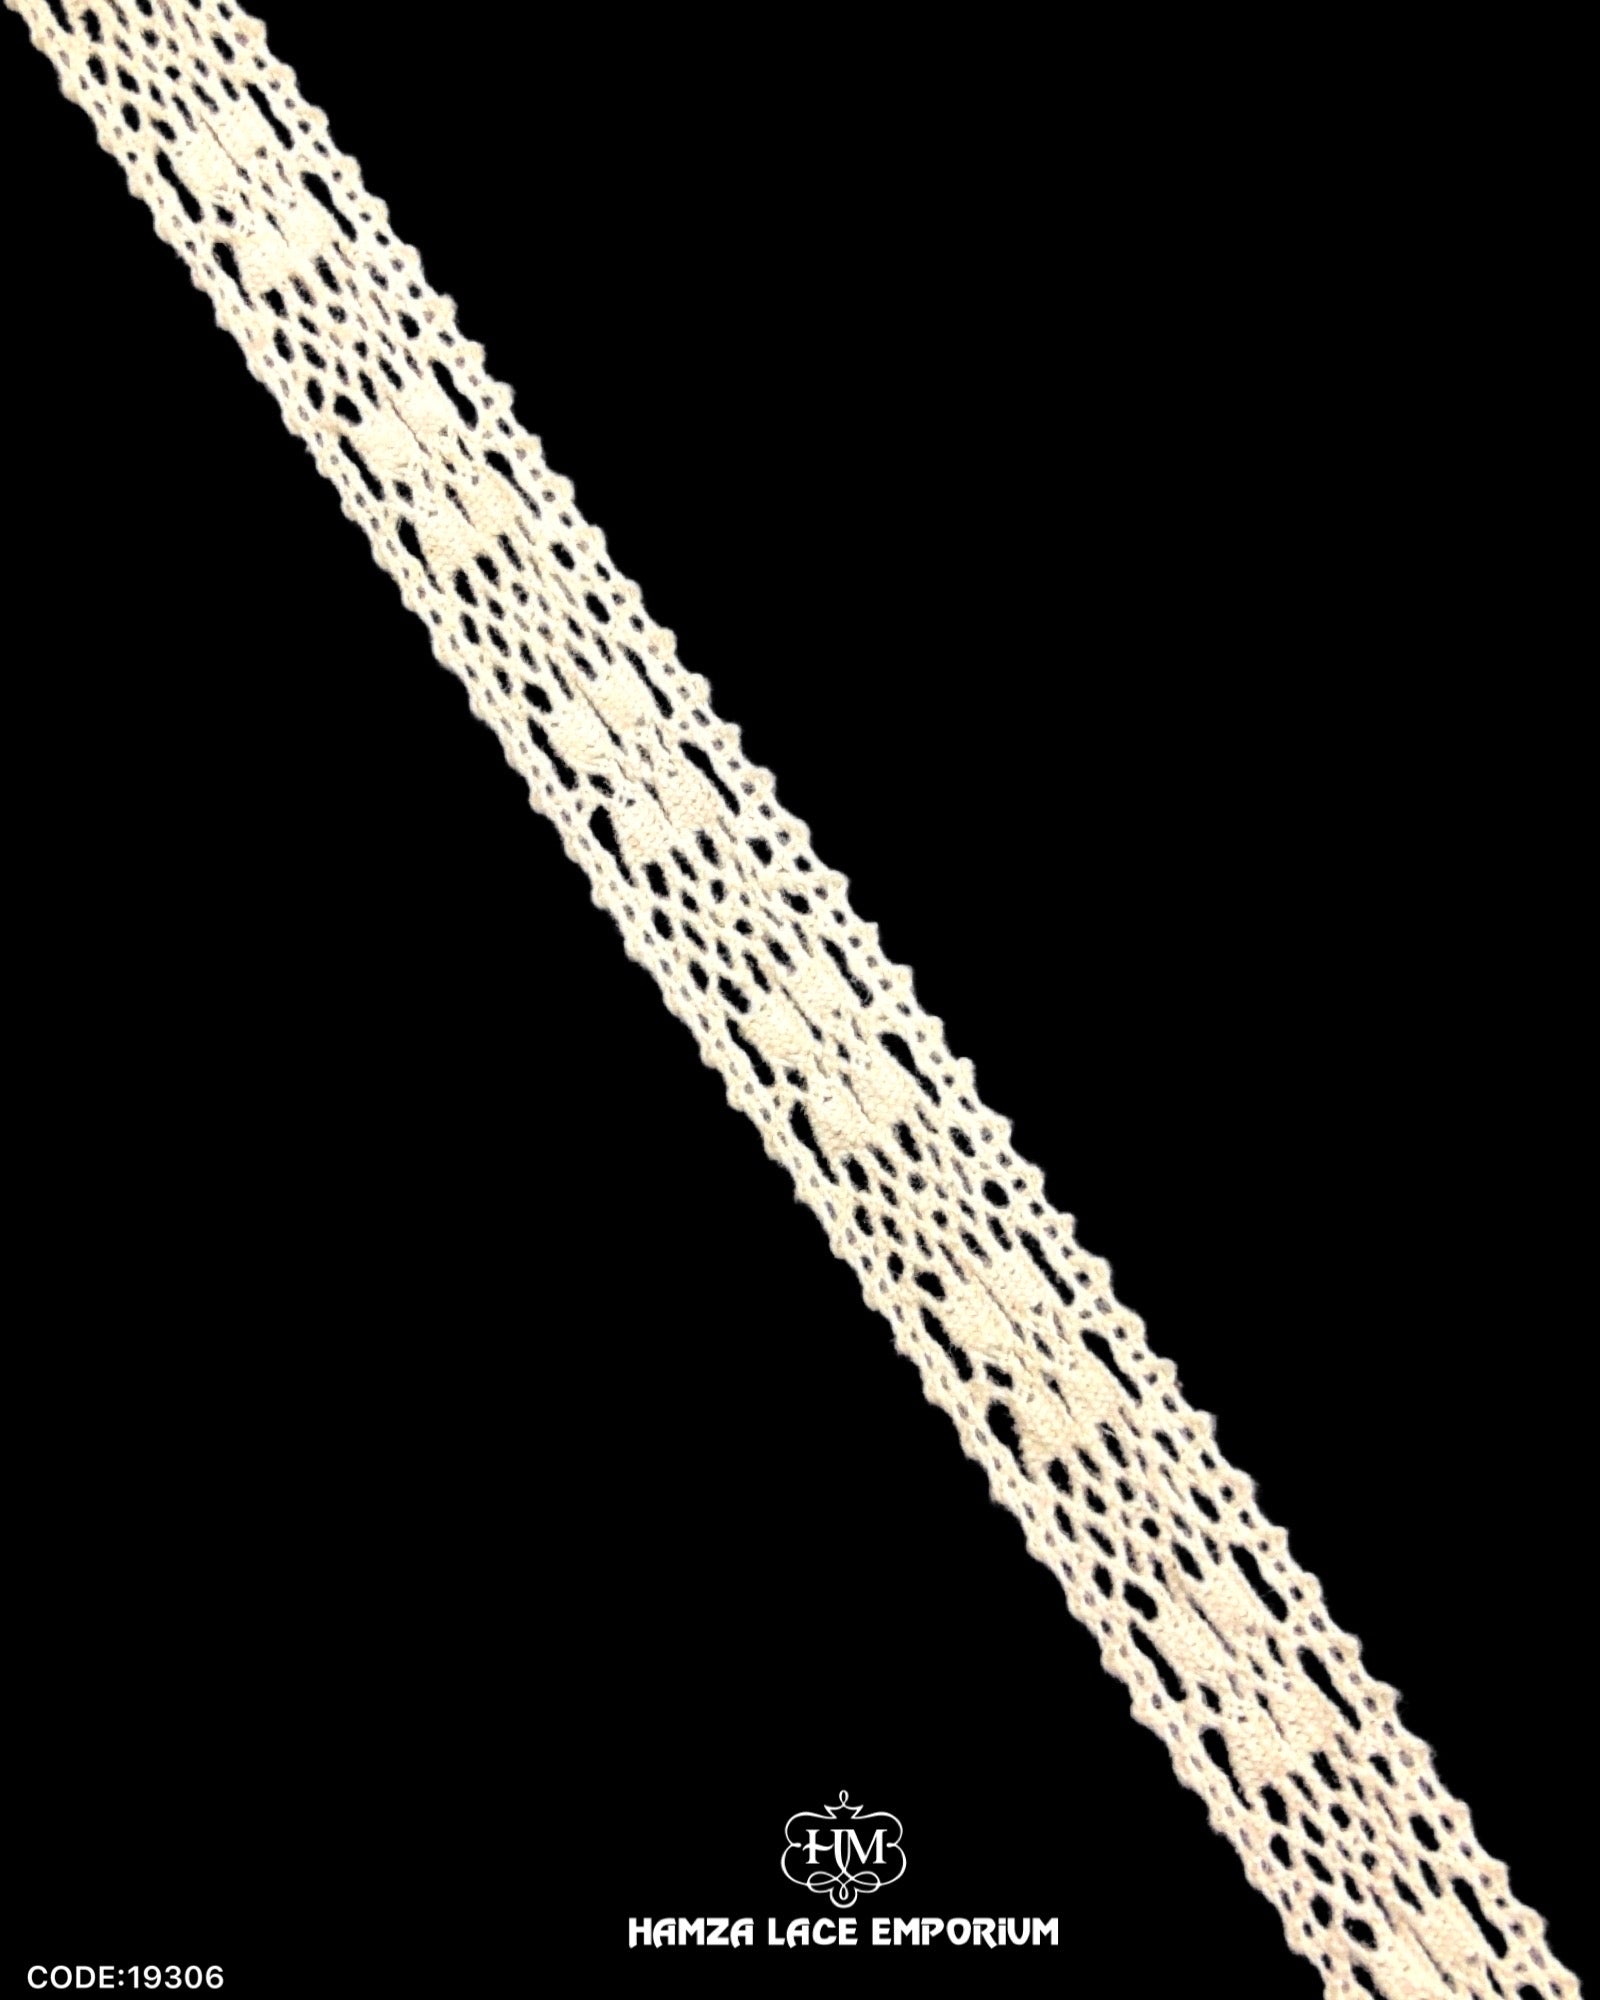 'Center Filling Crochet Lace 19306' with the name 'Hamza Lace' written at the bottom